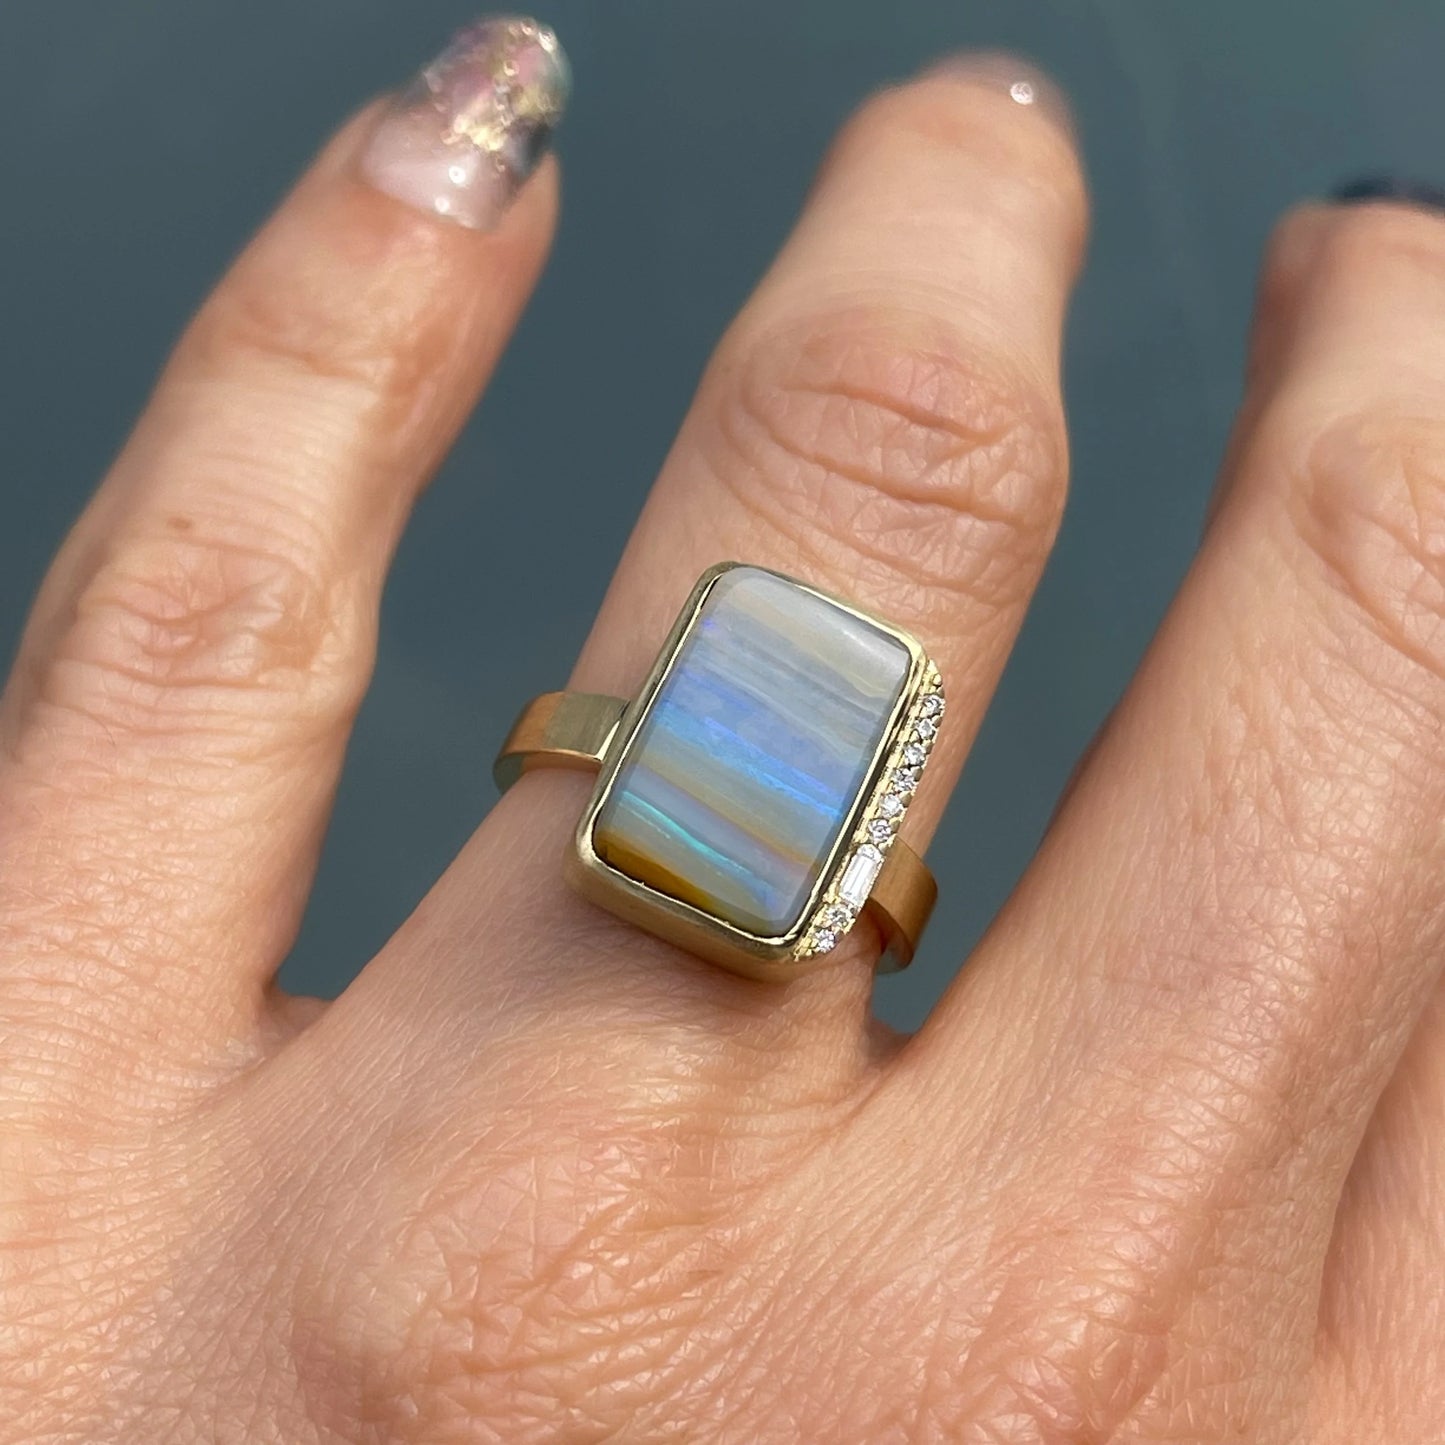 An Australian Opal Ring by NIXIN Jewelry with a blue opal and diamonds is modeled on a hand.